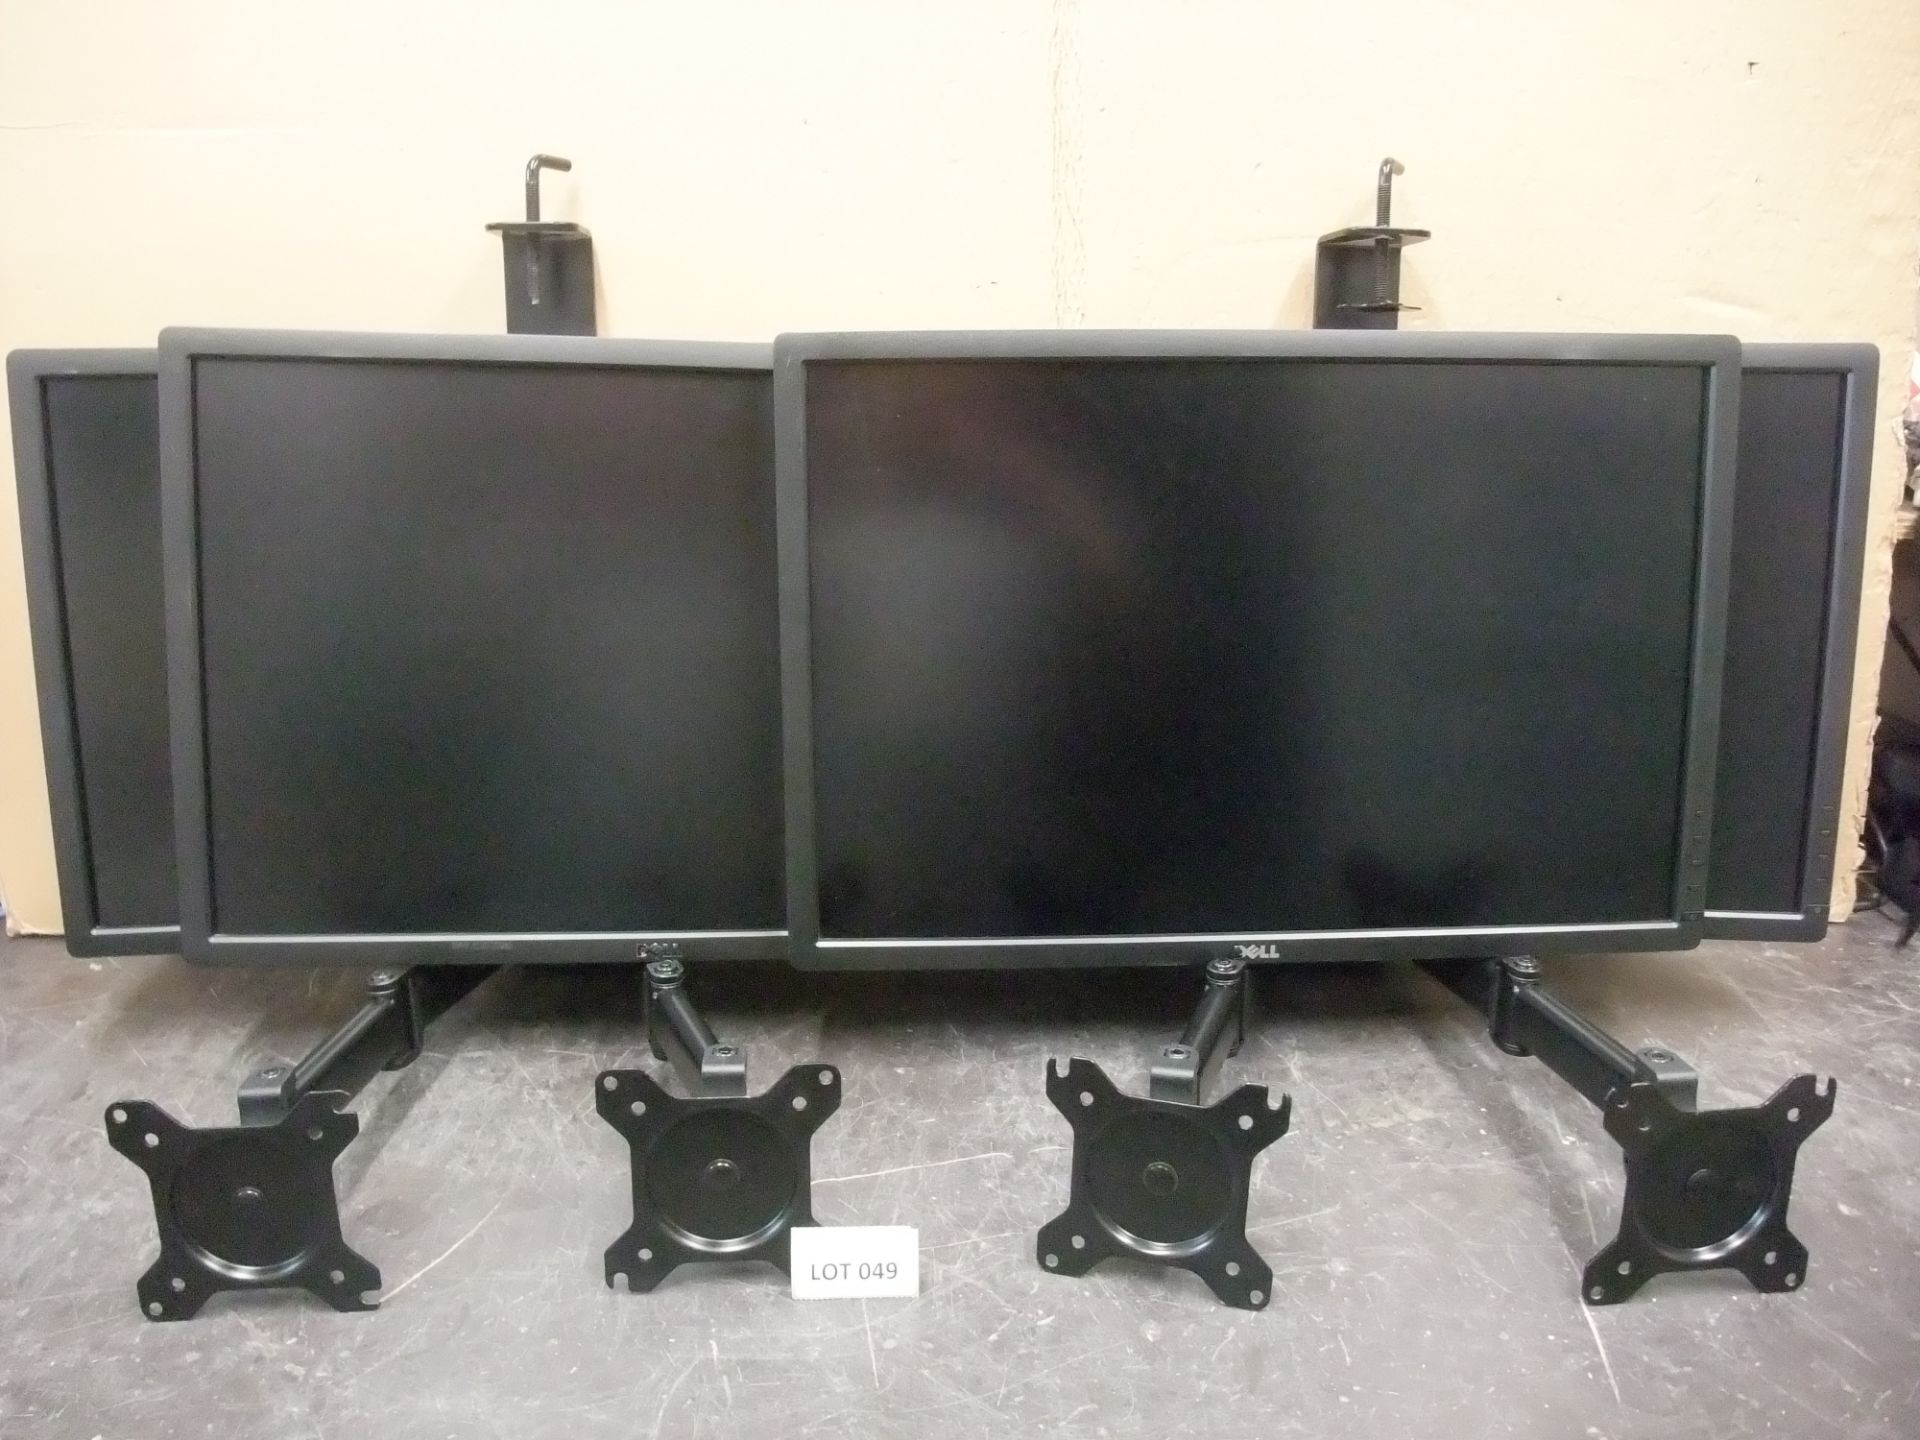 Four Dell U2412 24in. Monitors, with two twin deskmount monitor armsPlease read the following